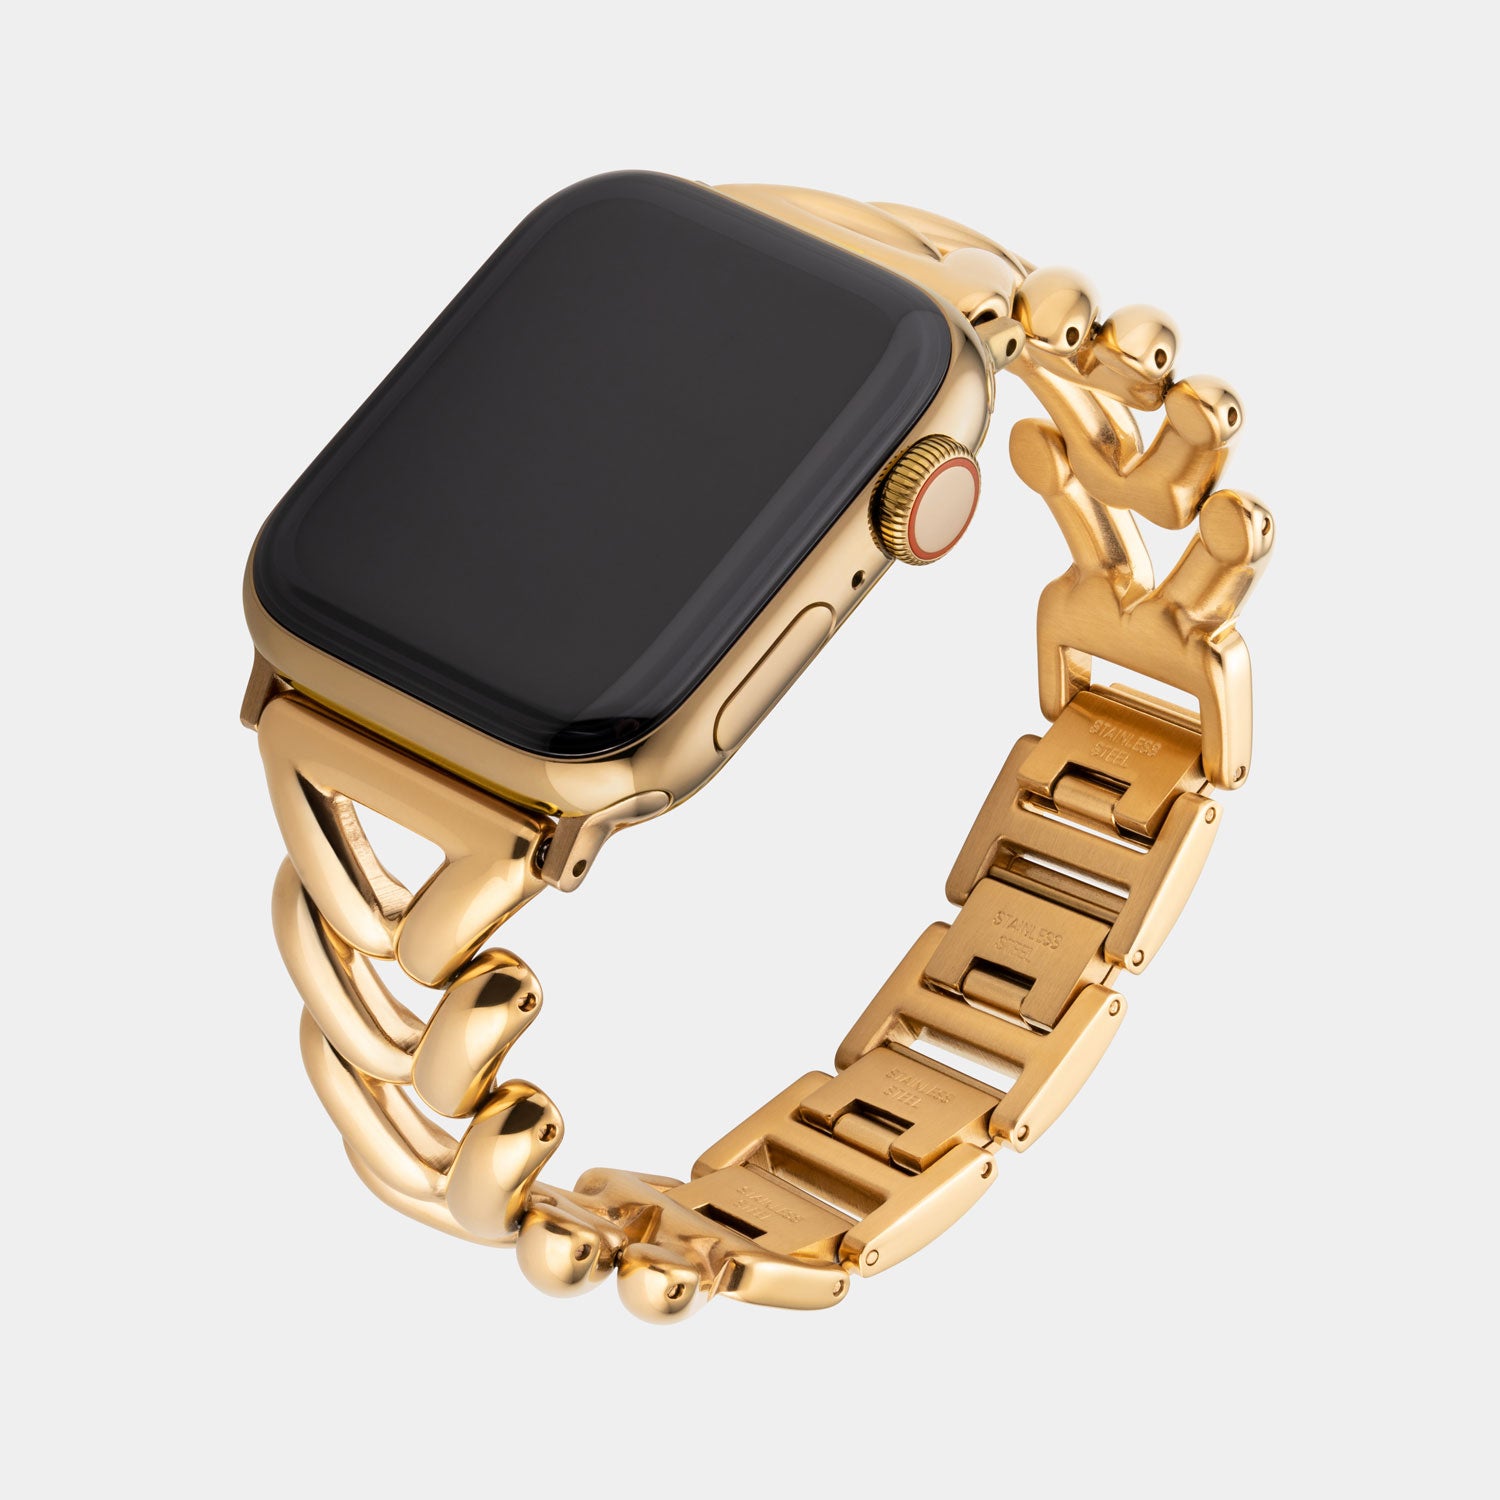 Gold Heart Shaped Apple Watch Strap by Buckle & Band